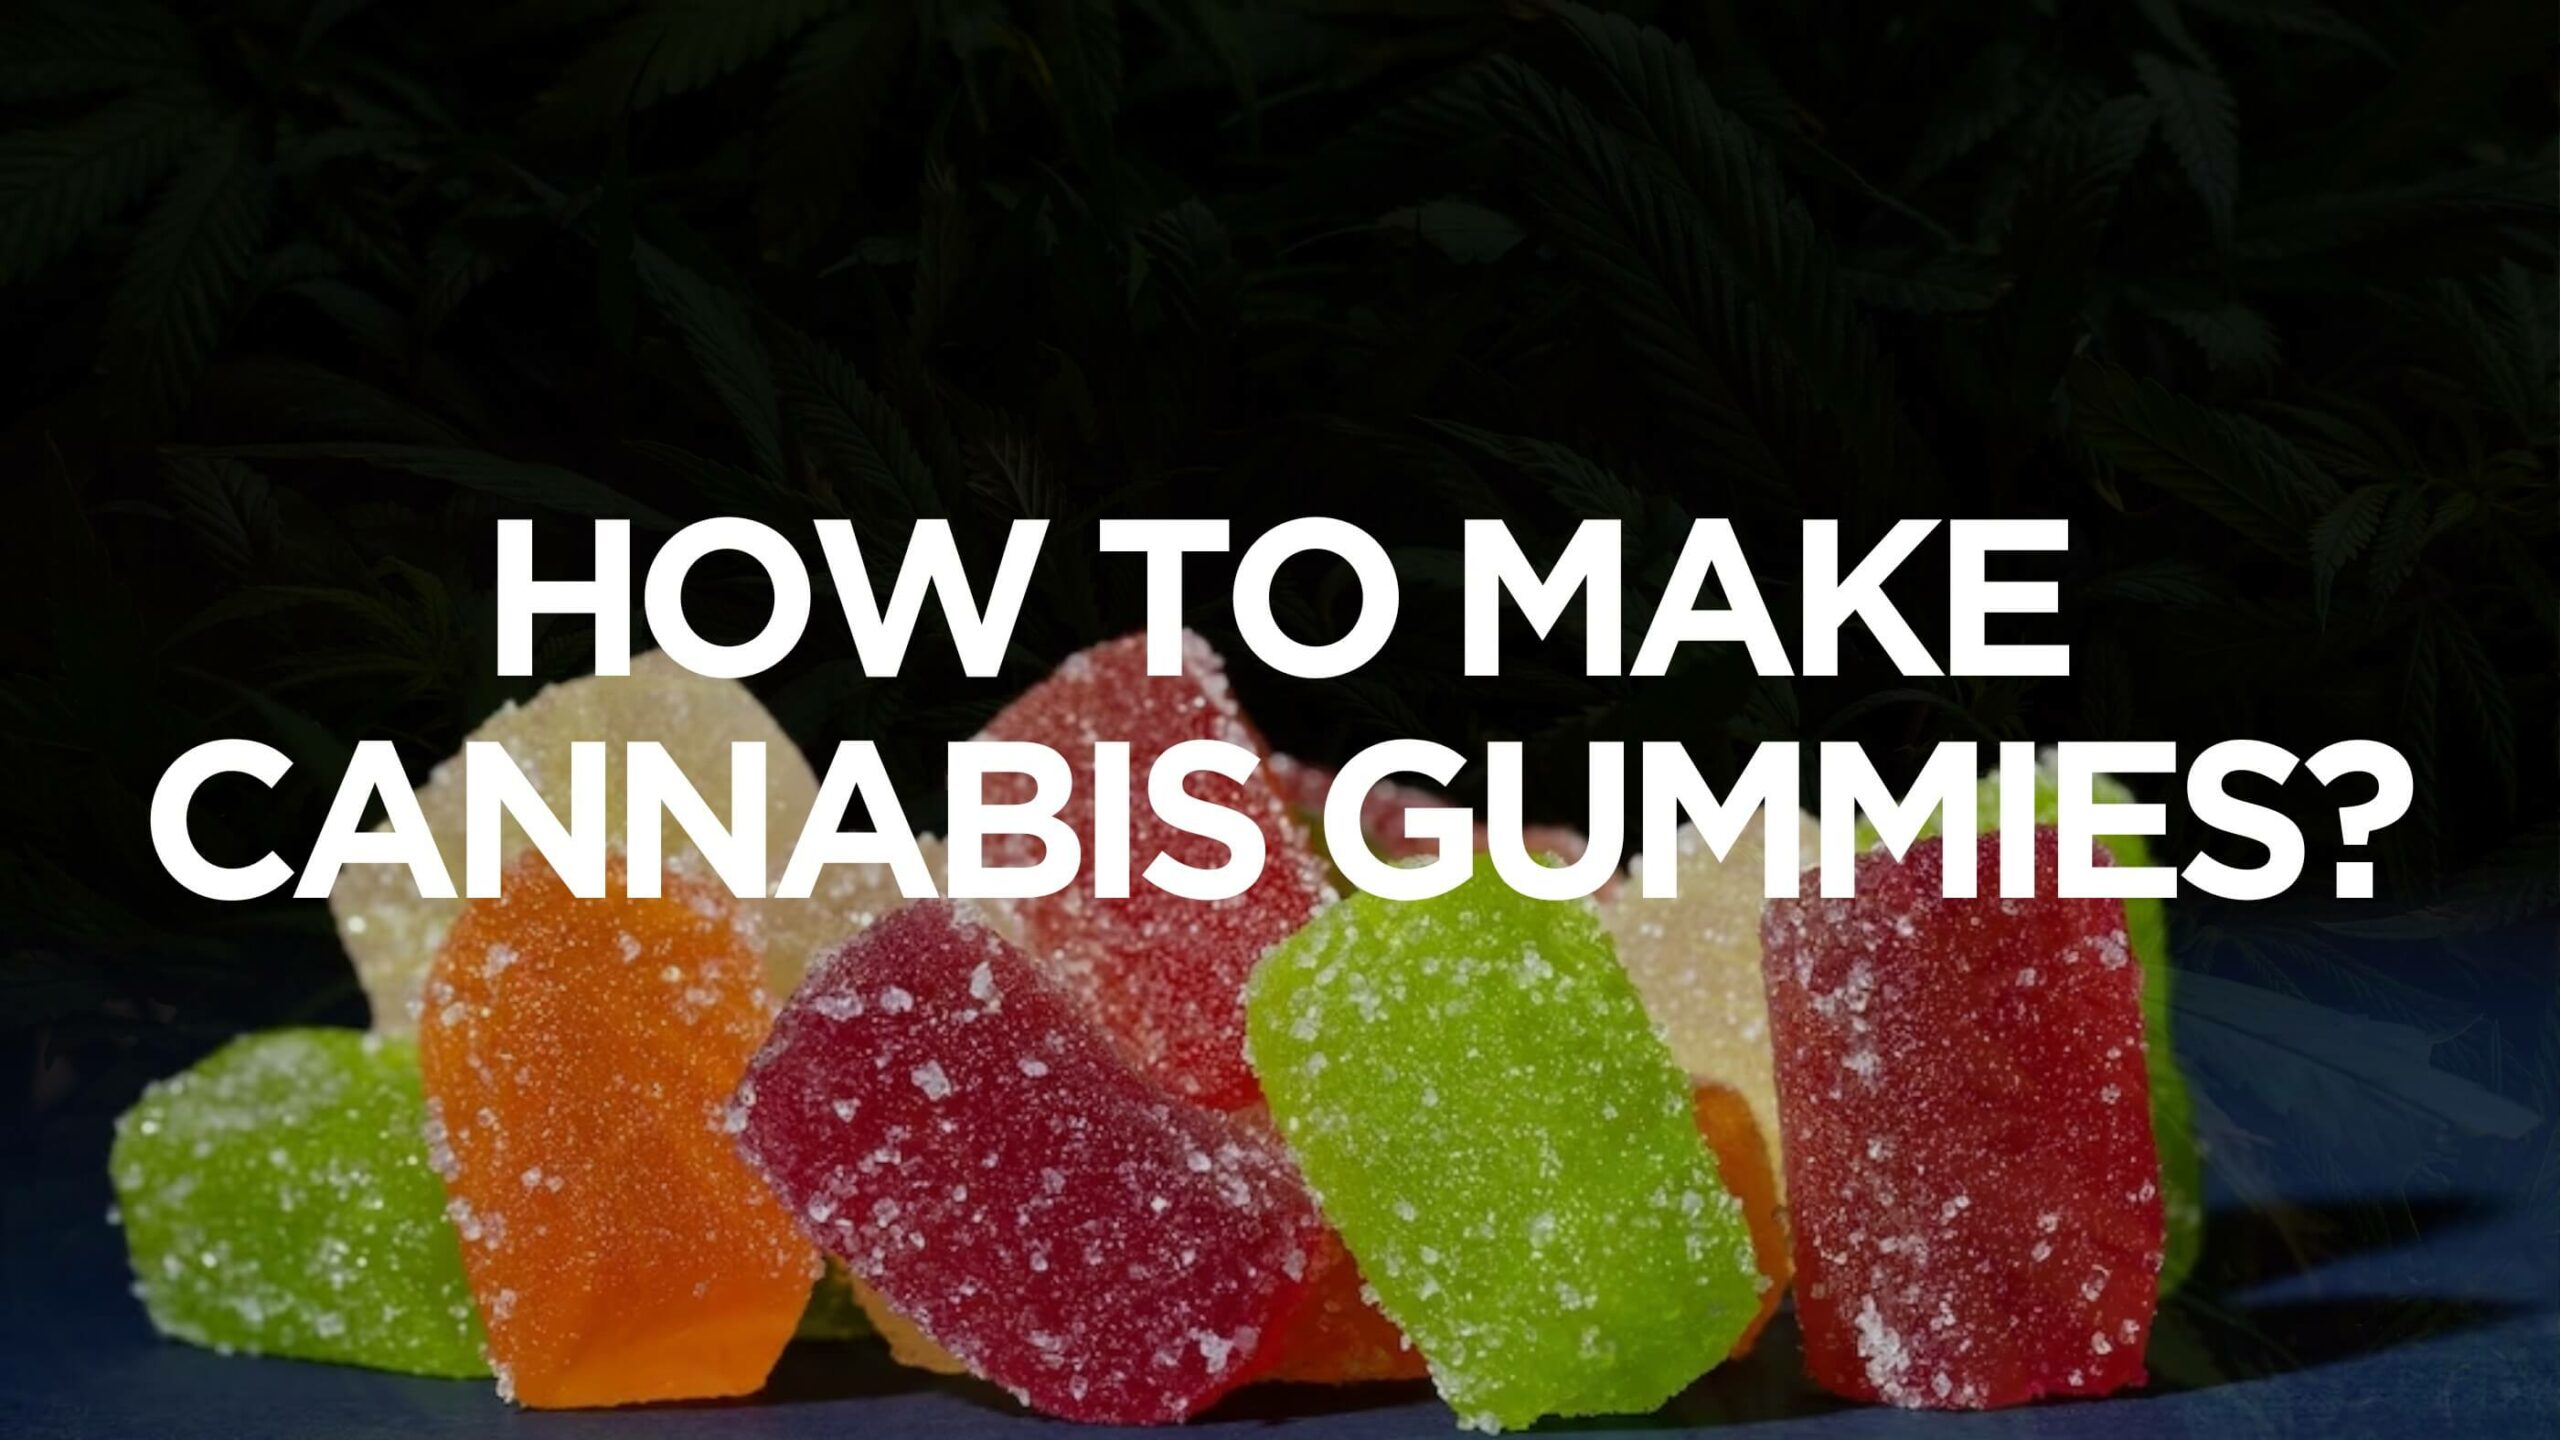 How to Make Cannabis Gummies with MCT oil